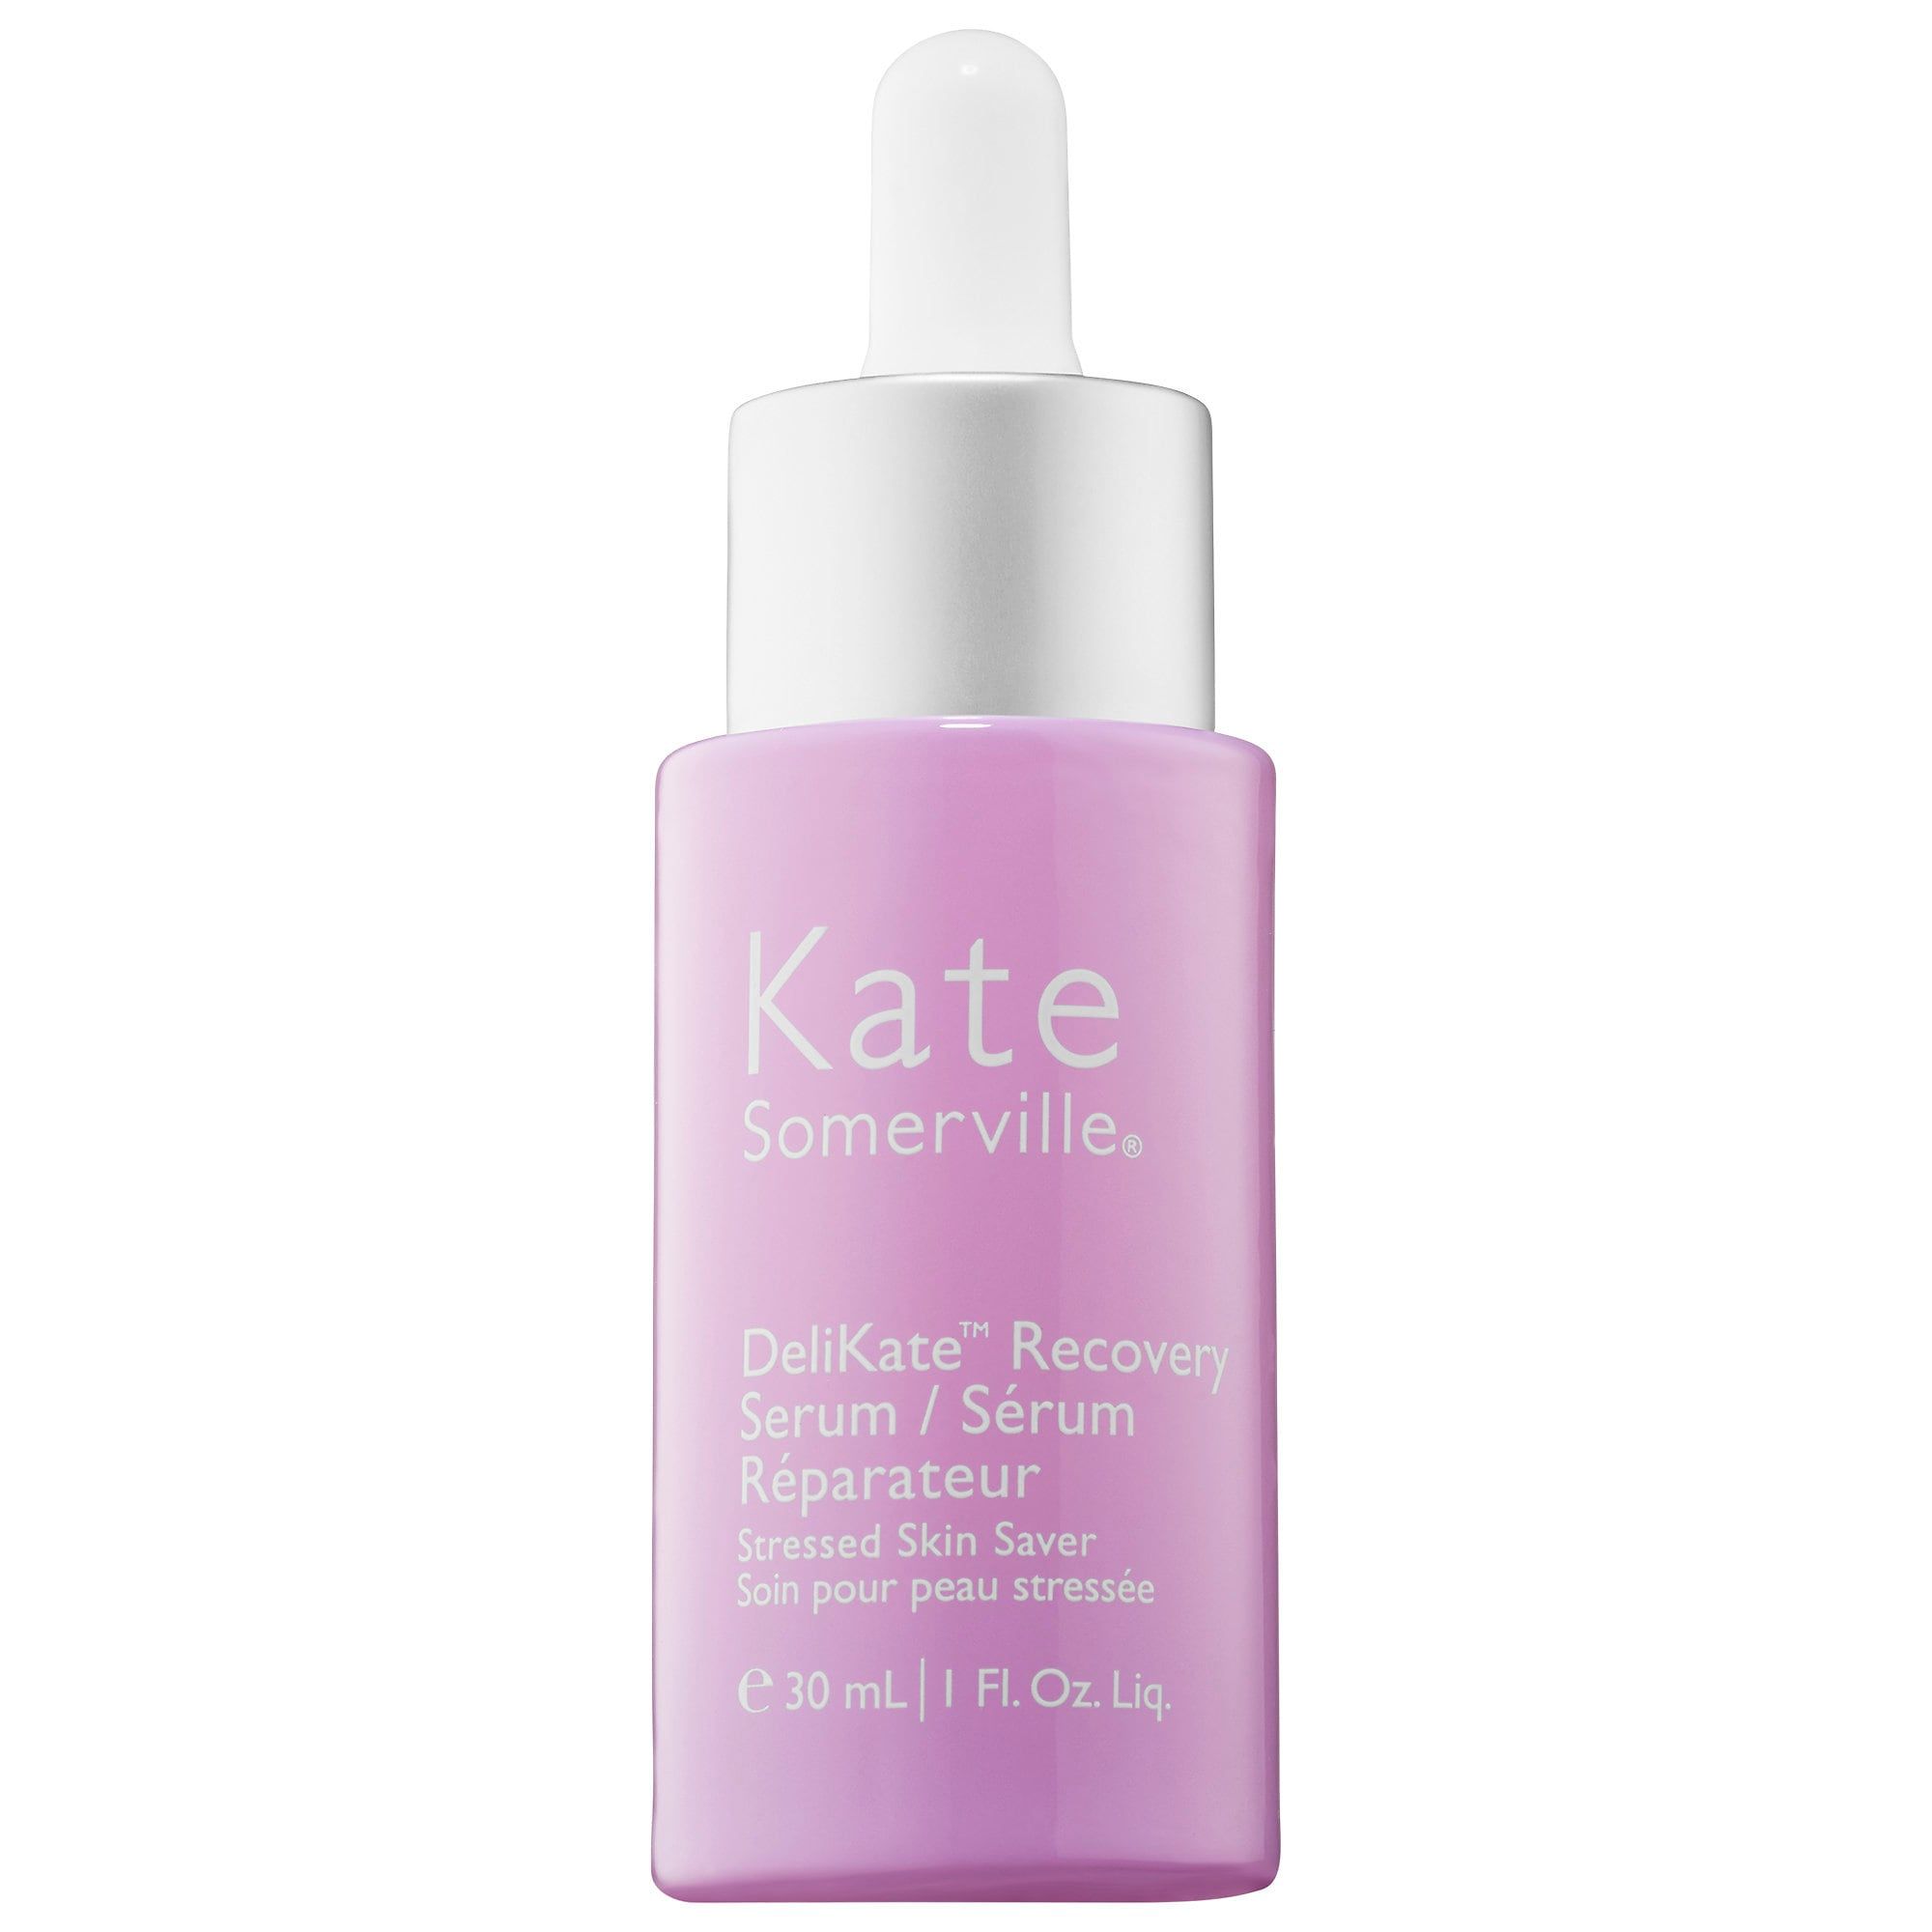 DeliKate Recovery Serum 